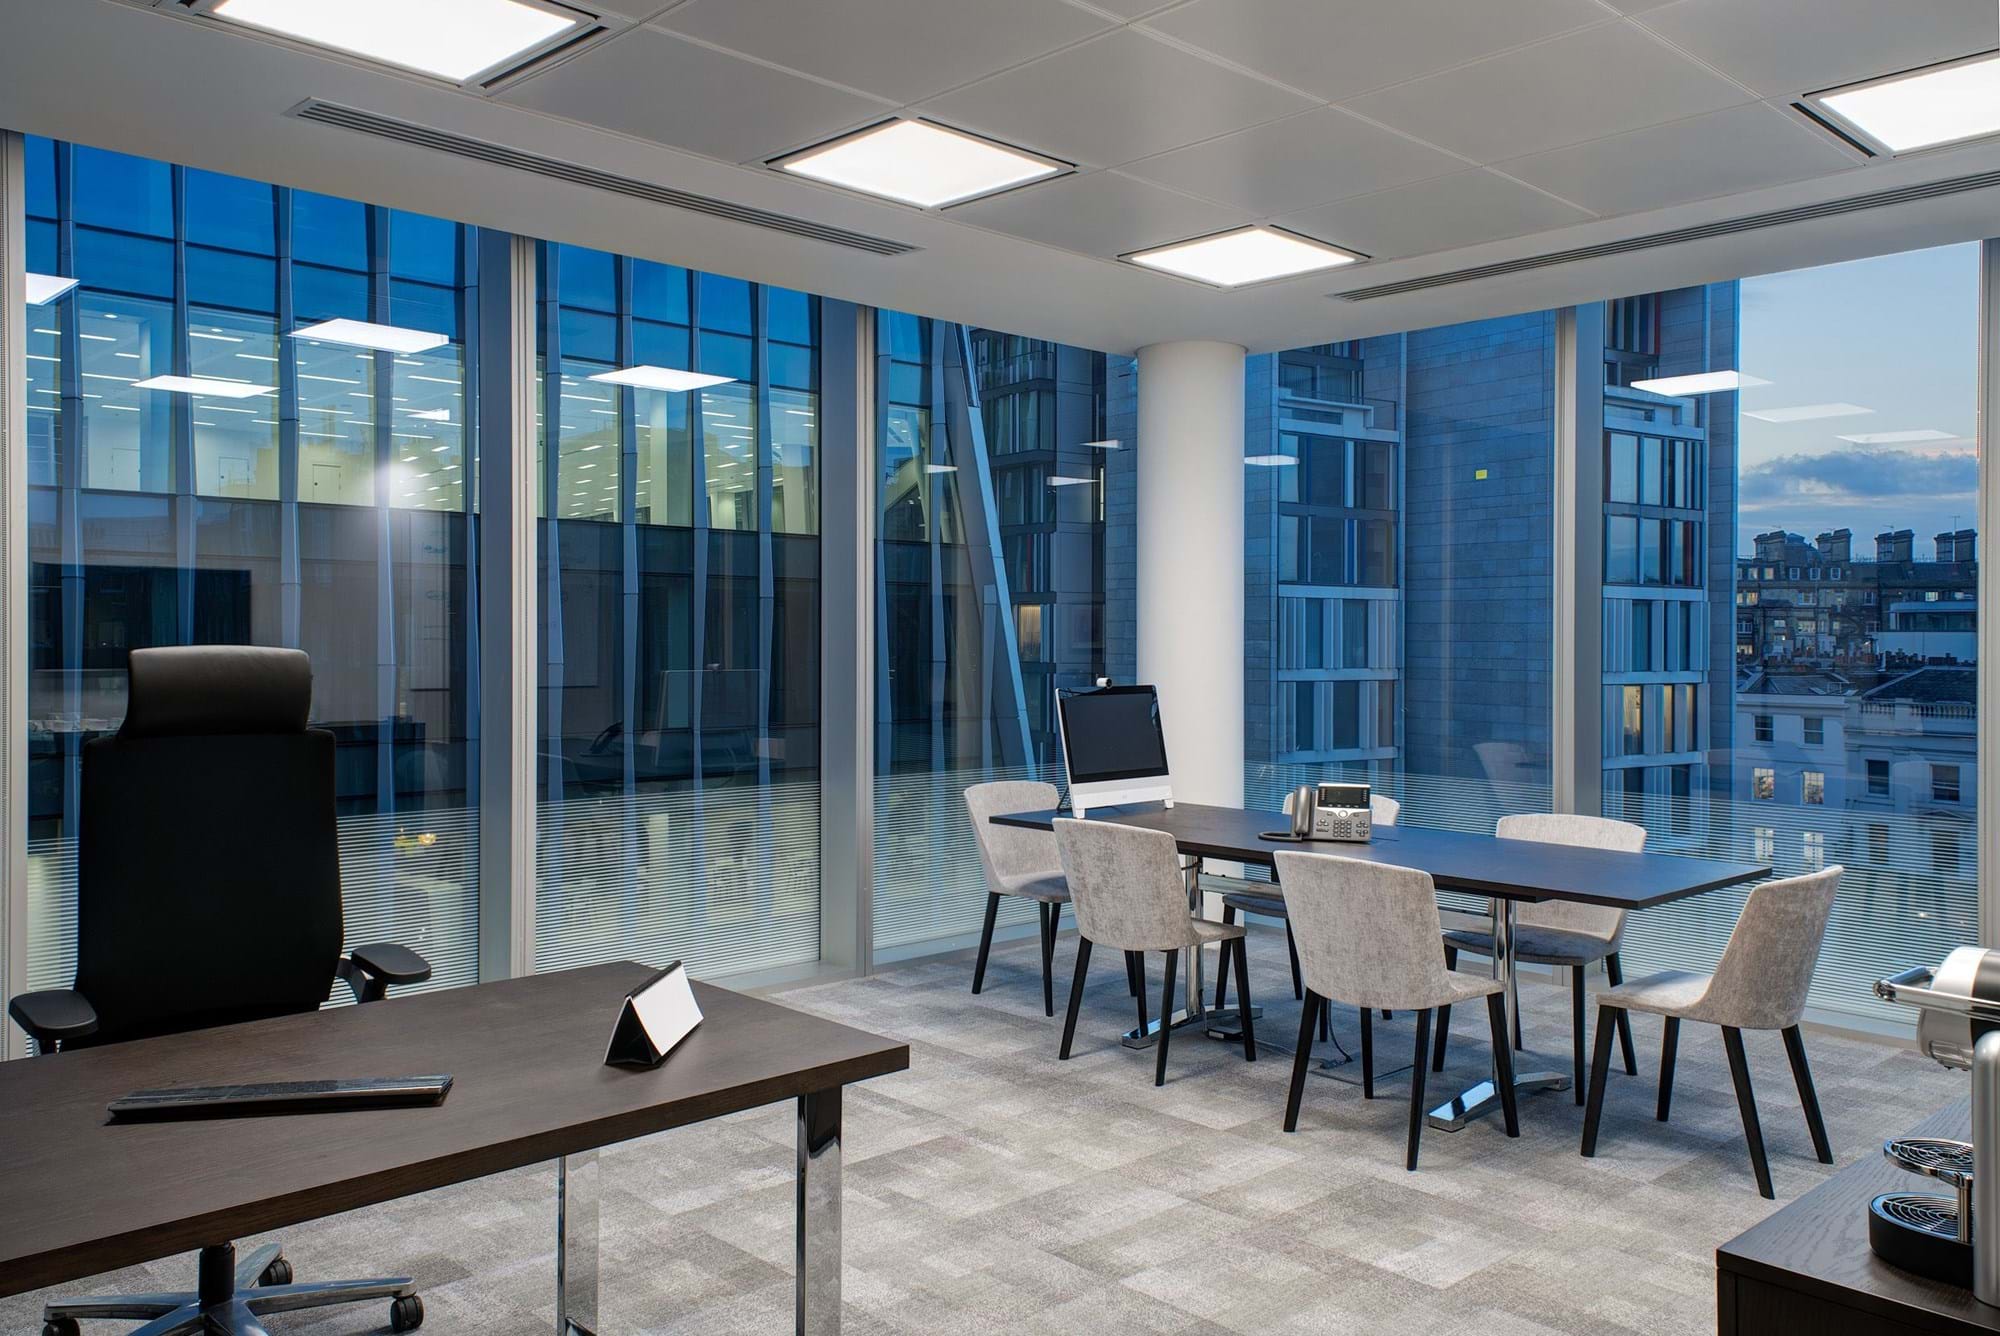 Modus Workspace office design, fit out and refurbishment - Dimension Data - Dimension Data 19 highres sRGB.jpg